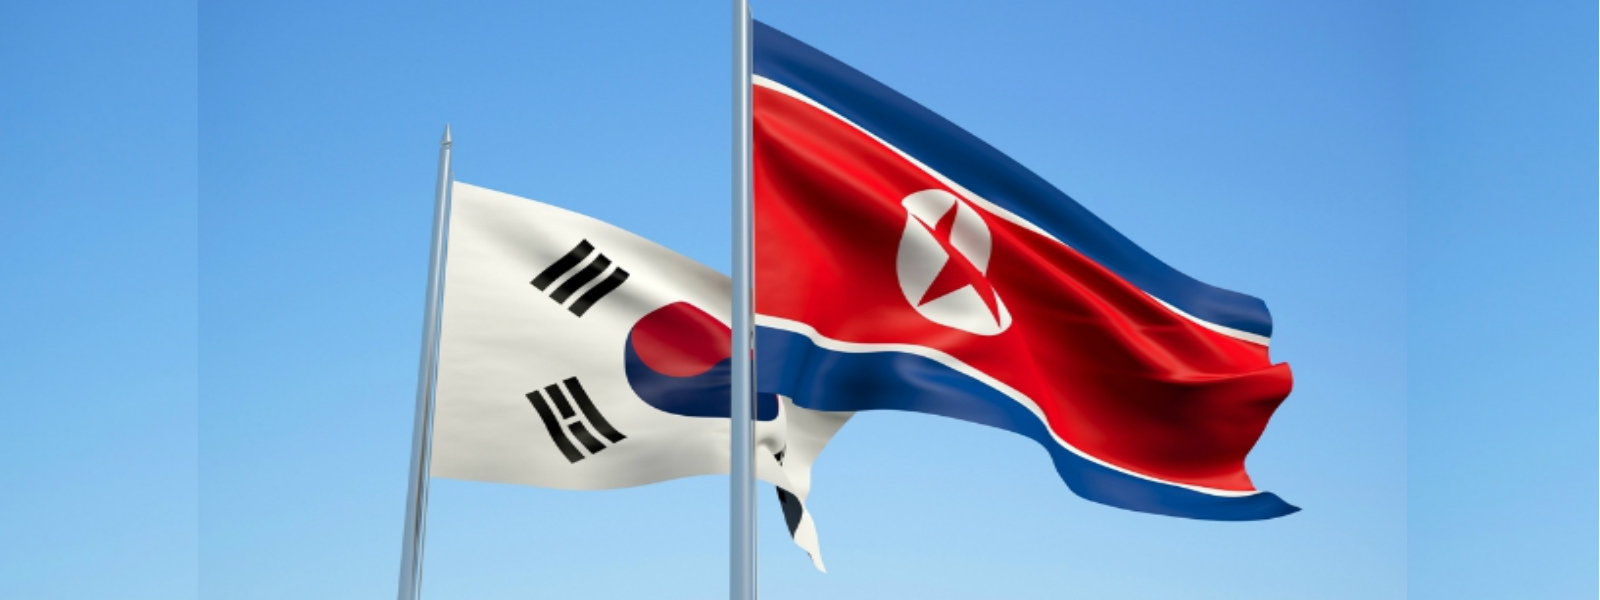 S Korea & N Korea to hold another round of talks